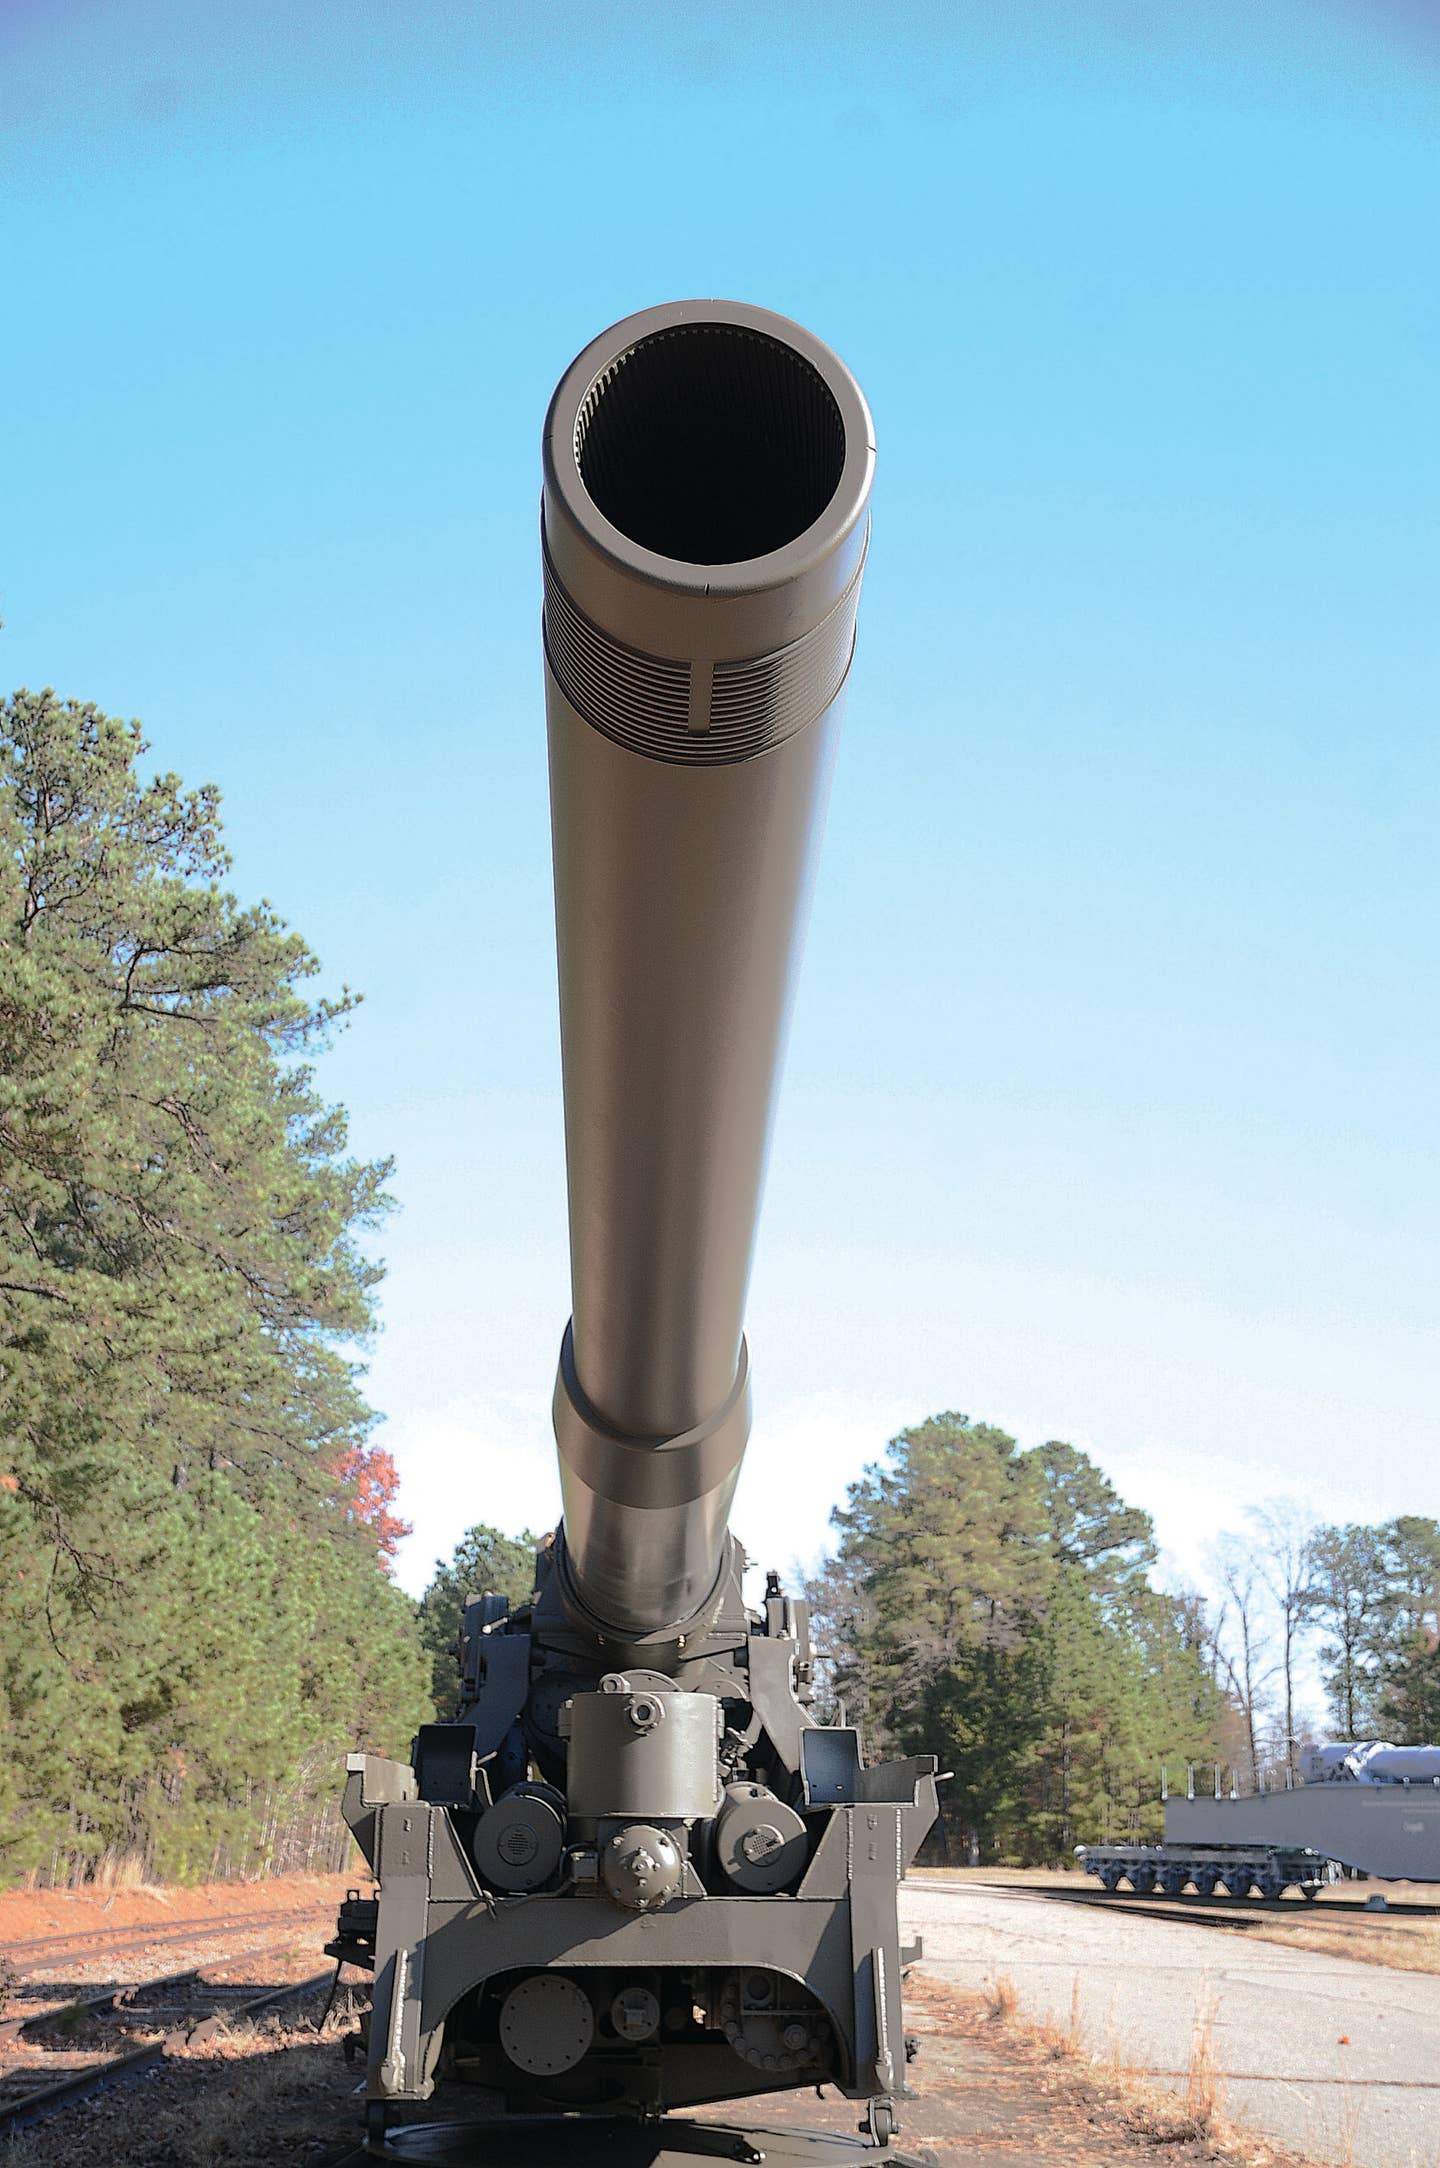 The M65 series artillery piece, nicknamed Atomic Annie, is a 280mm cannon capable of firing a nuclear round. Twenty copies were made between 1953-63.  Several survive and are on display at museums and other venues across the country.